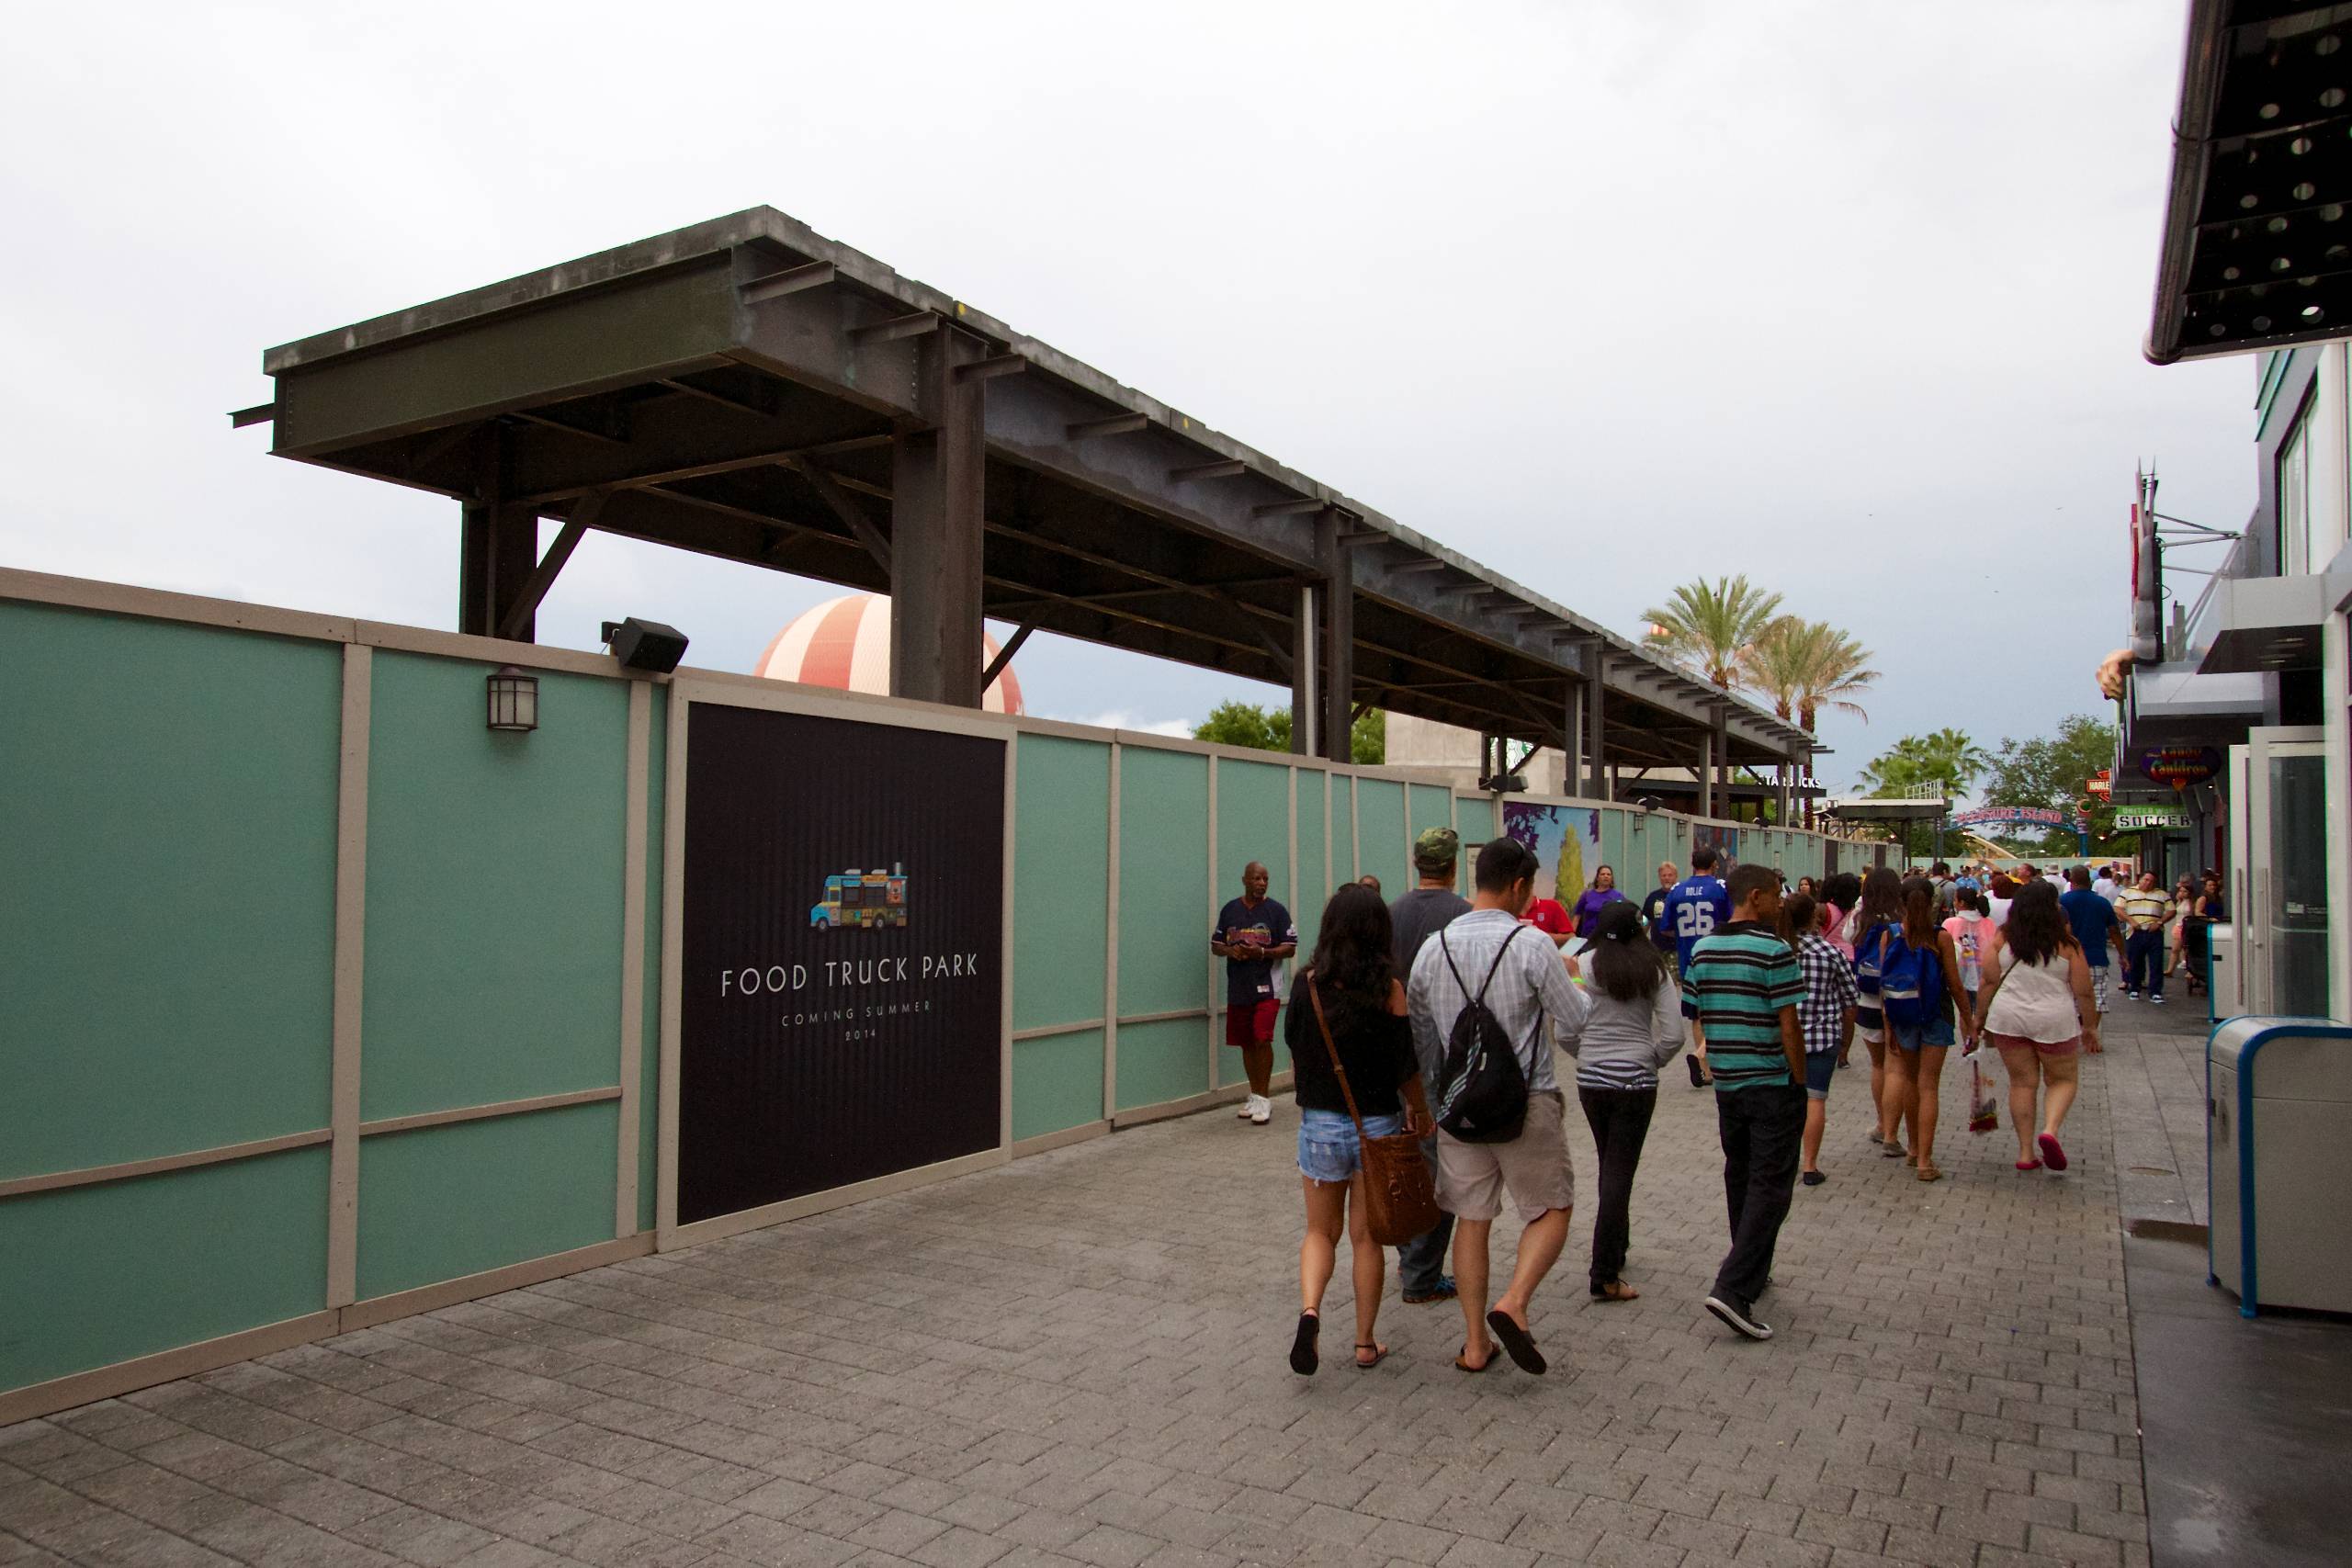 PHOTOS - Phase 2 of the Disney Springs West Side Highline is now under construction